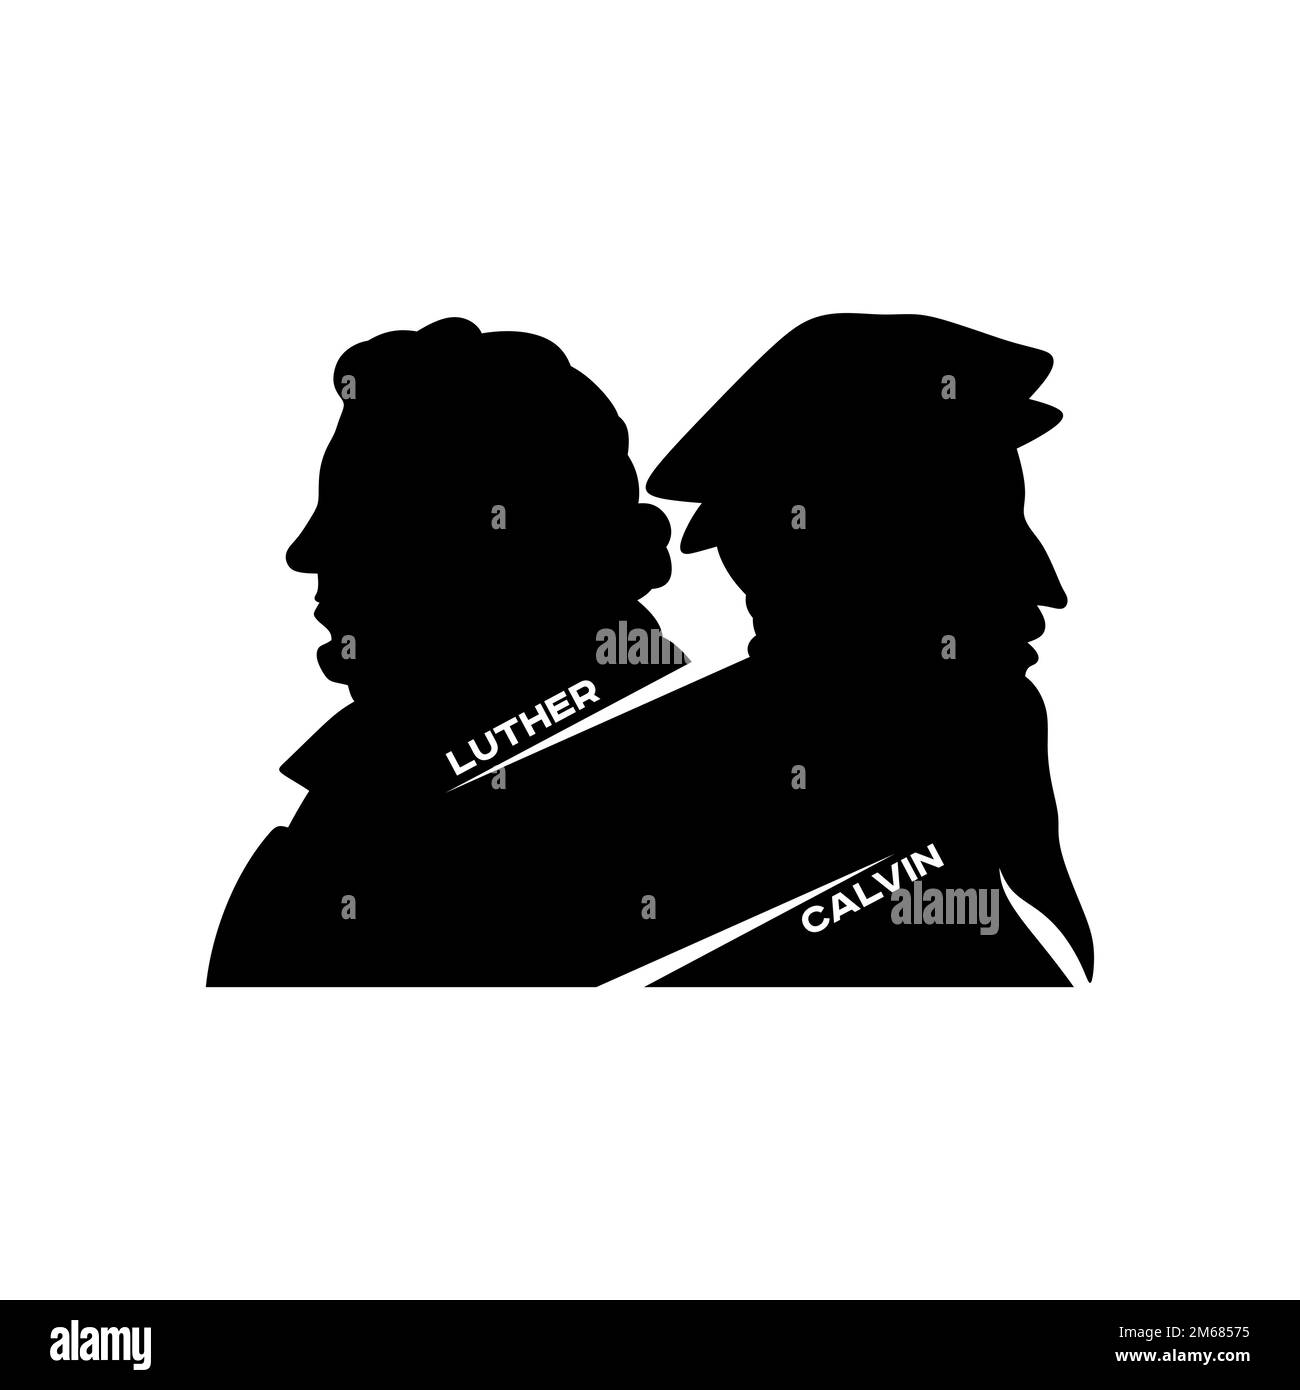 Christian Illustration. Silhouettes of the great Christian reformers. Martin Luther and John Calvin. Stock Vector